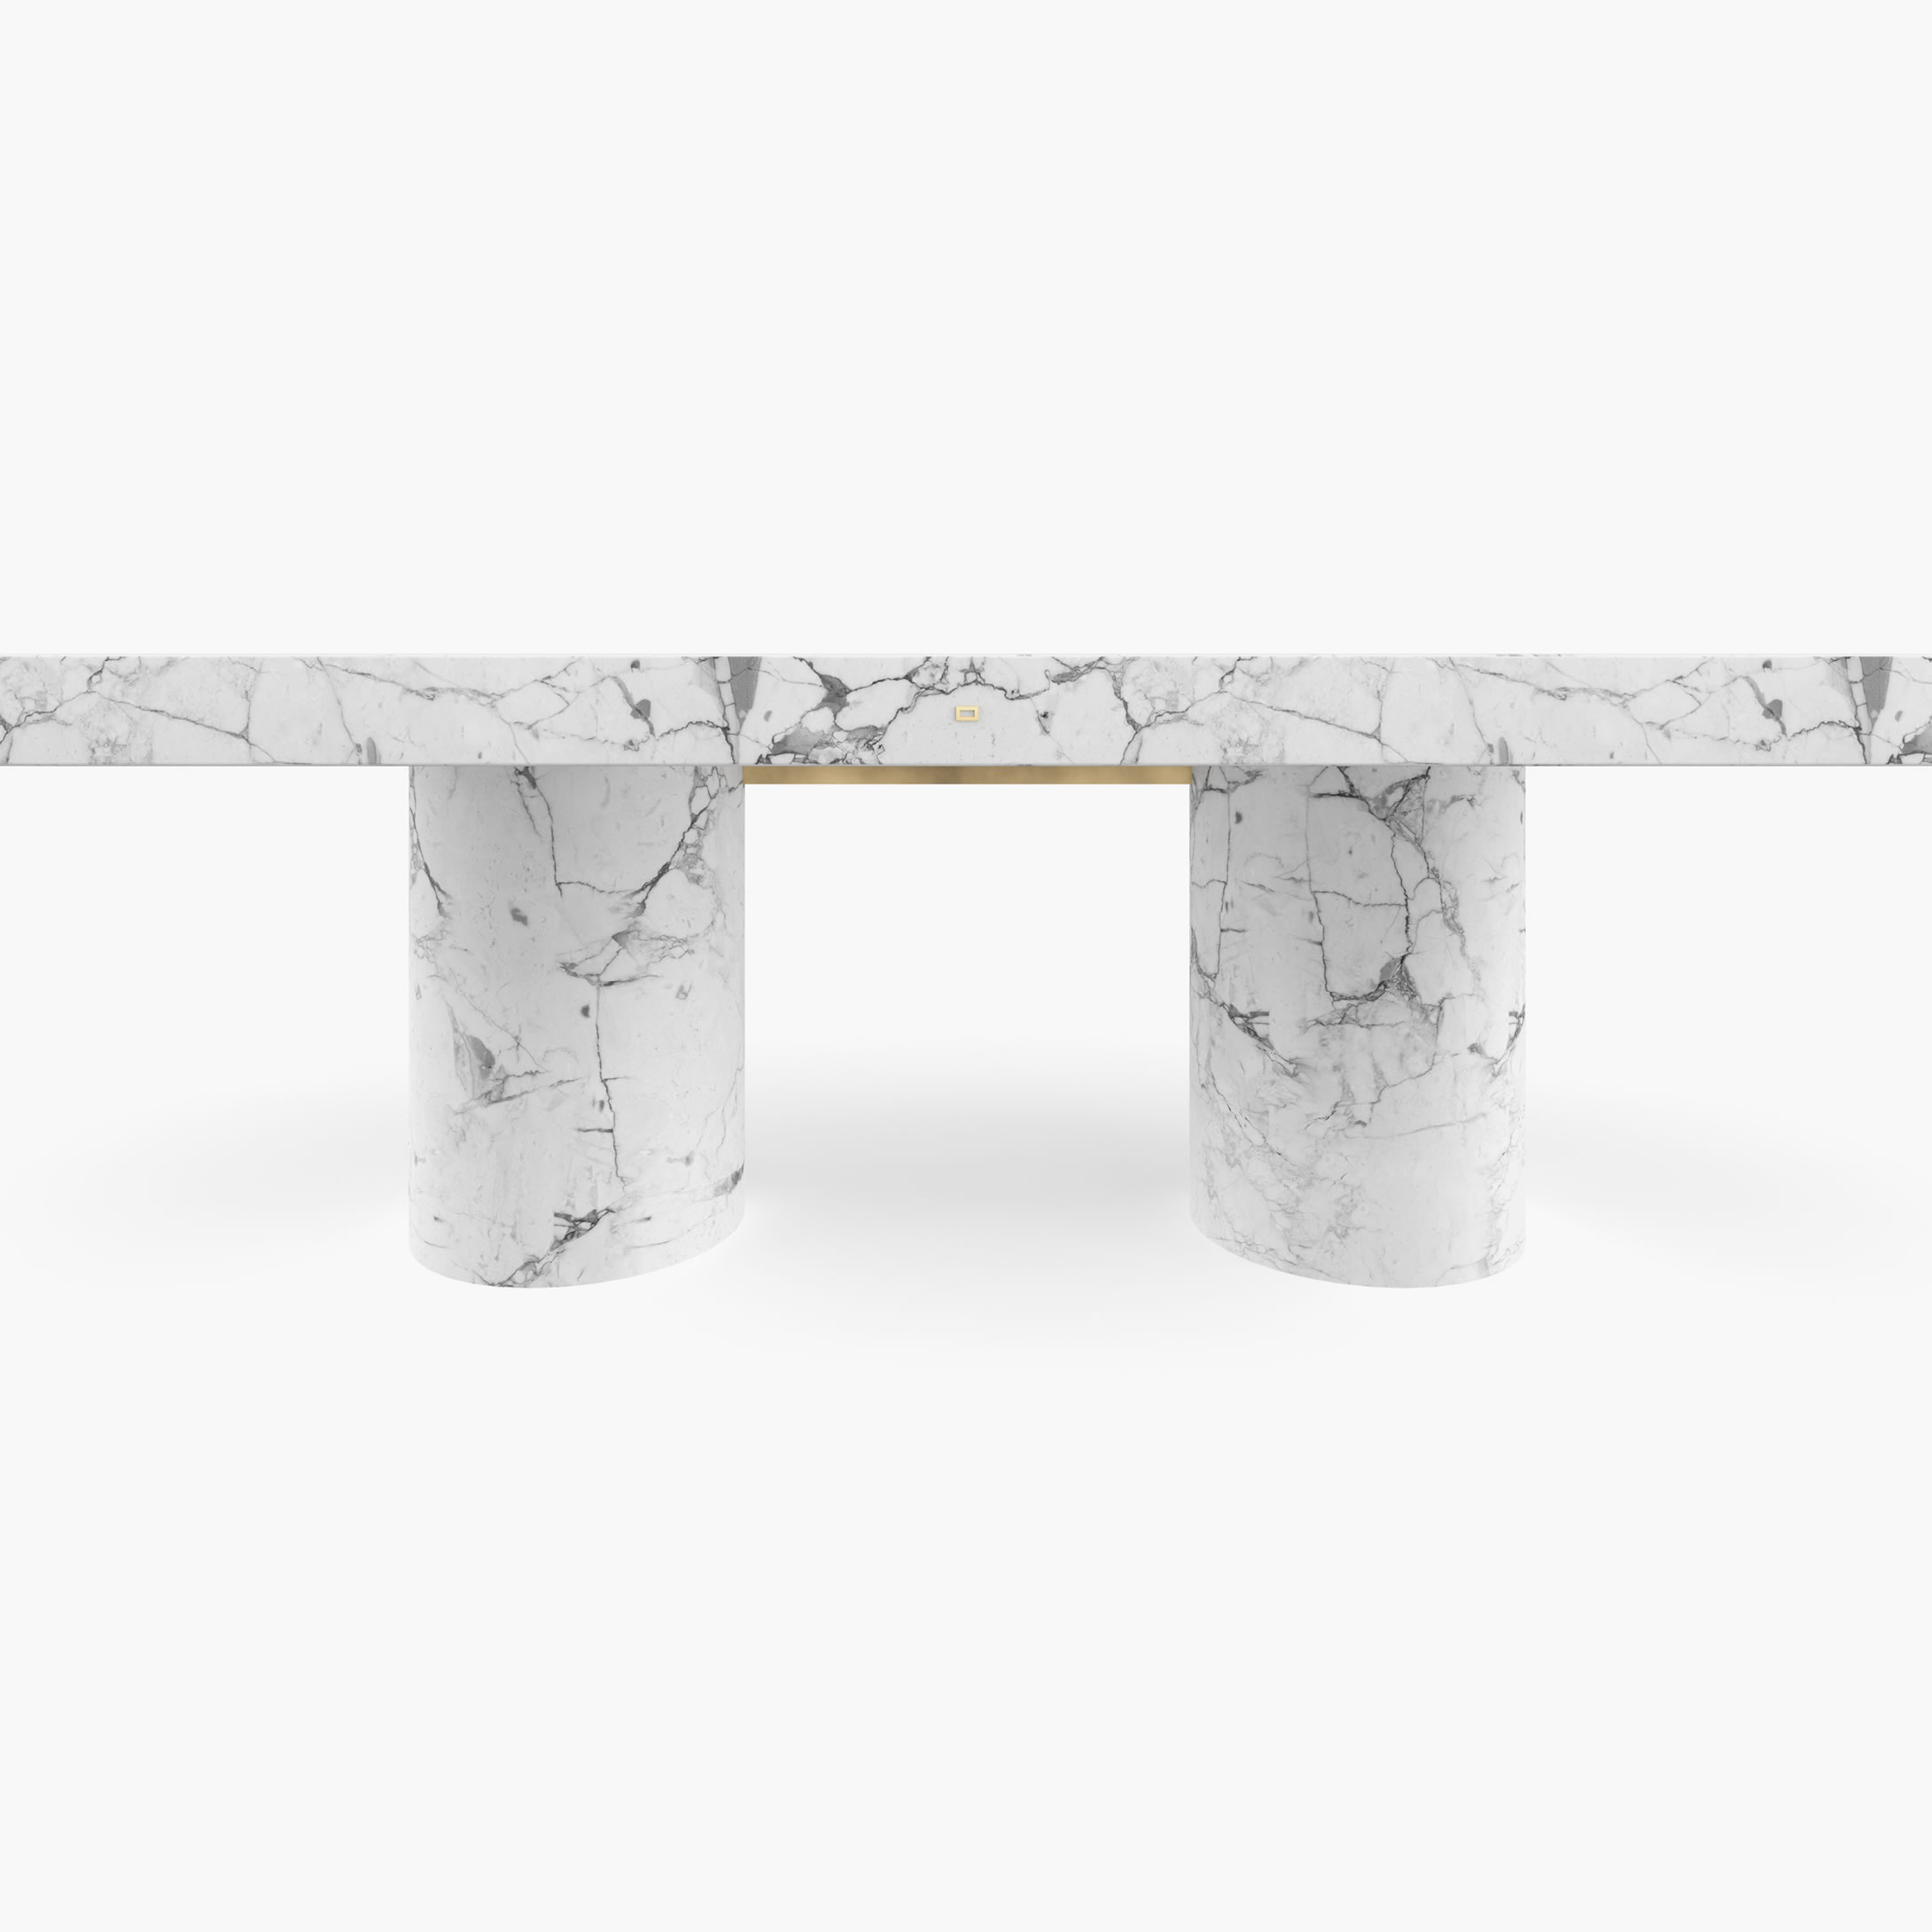 Dining Table Cylinder legs White Arabescato Marble futuristic Dining Room Luxury Dining Tables FS 178 FELIX SCHWAKE